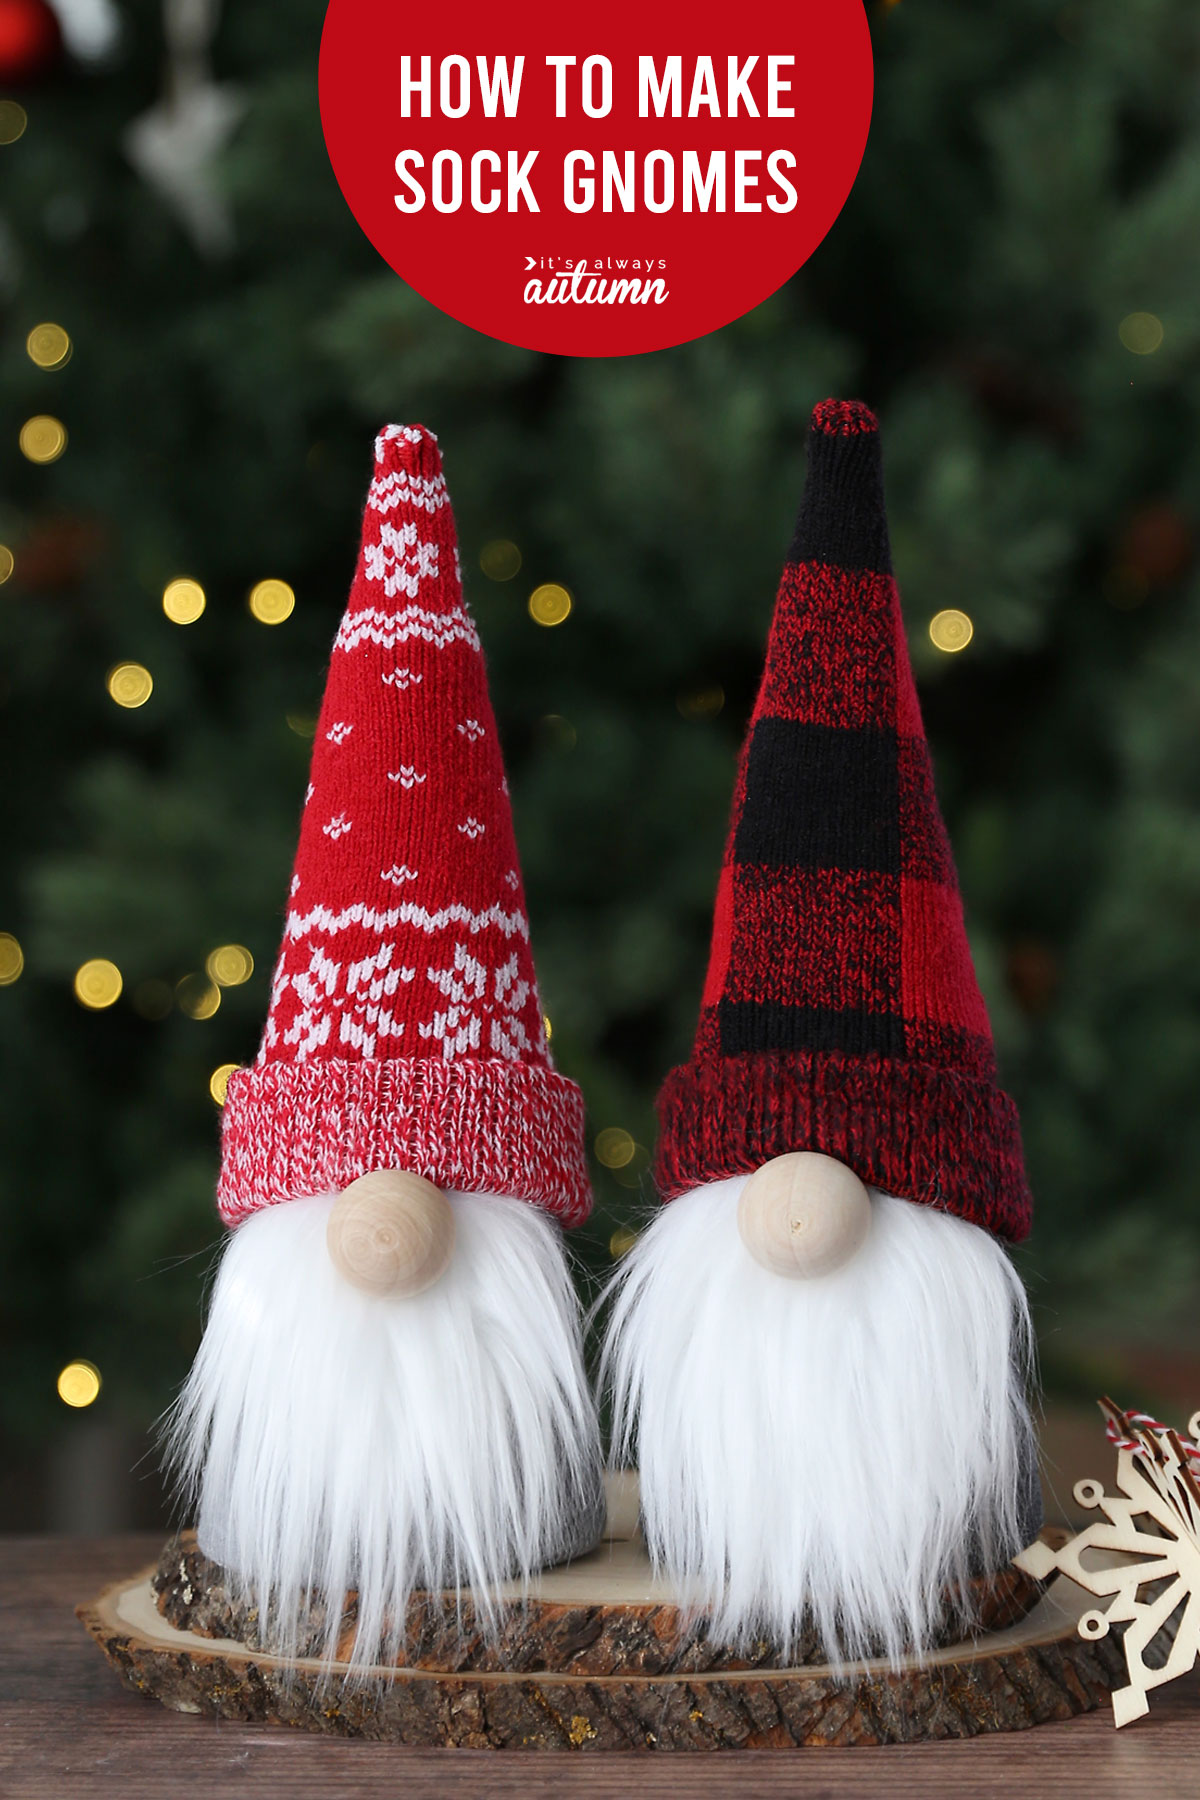 Learn how to make adorable sock gnomes for Christmas or any other holiday!